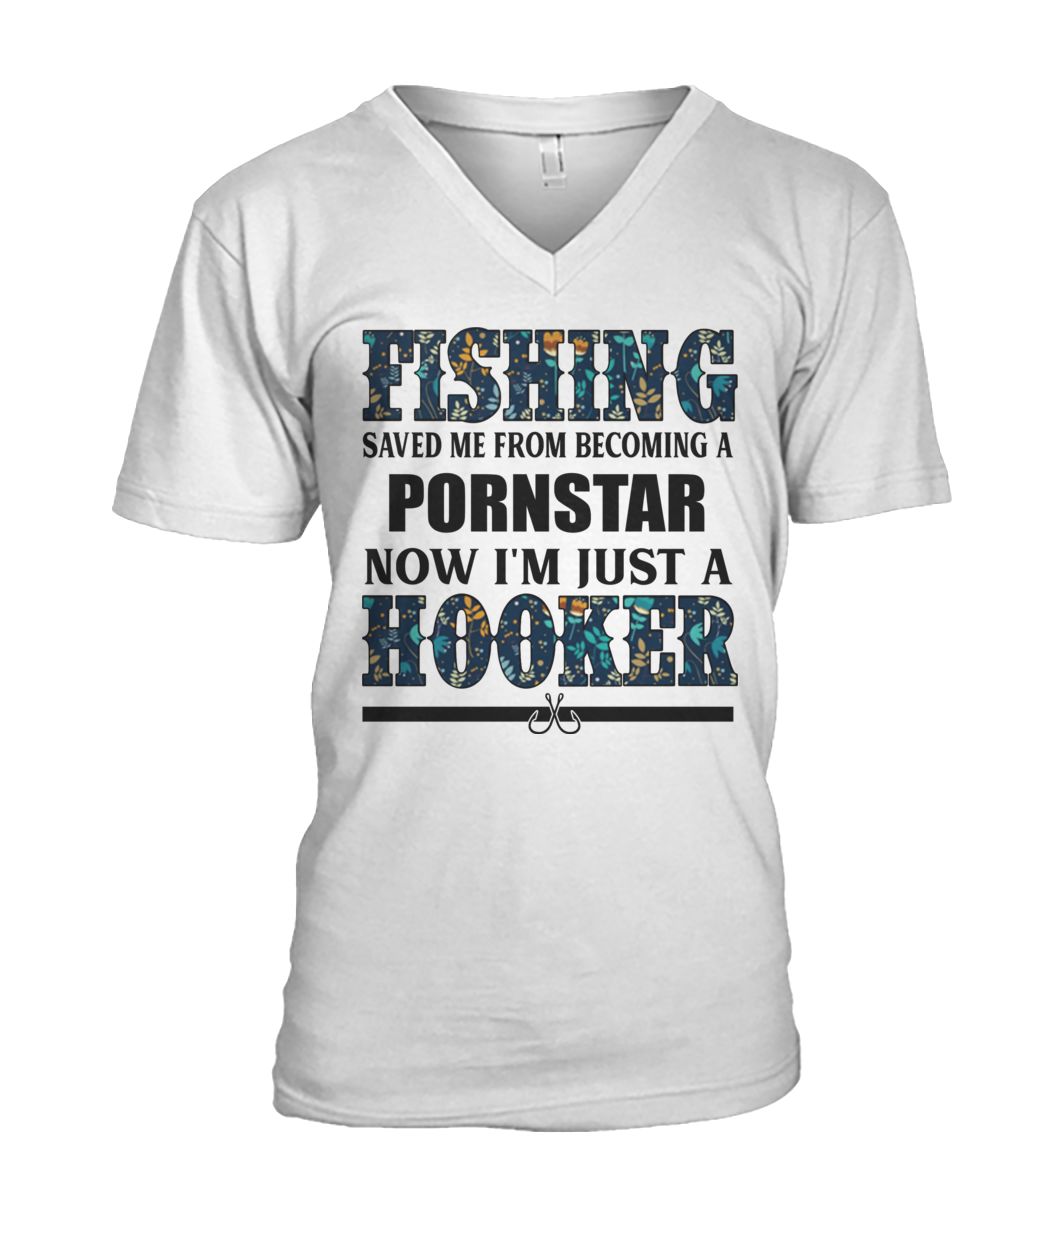 Fishing saved me from being pornstar now I'm just a hooker floral mens v-neck